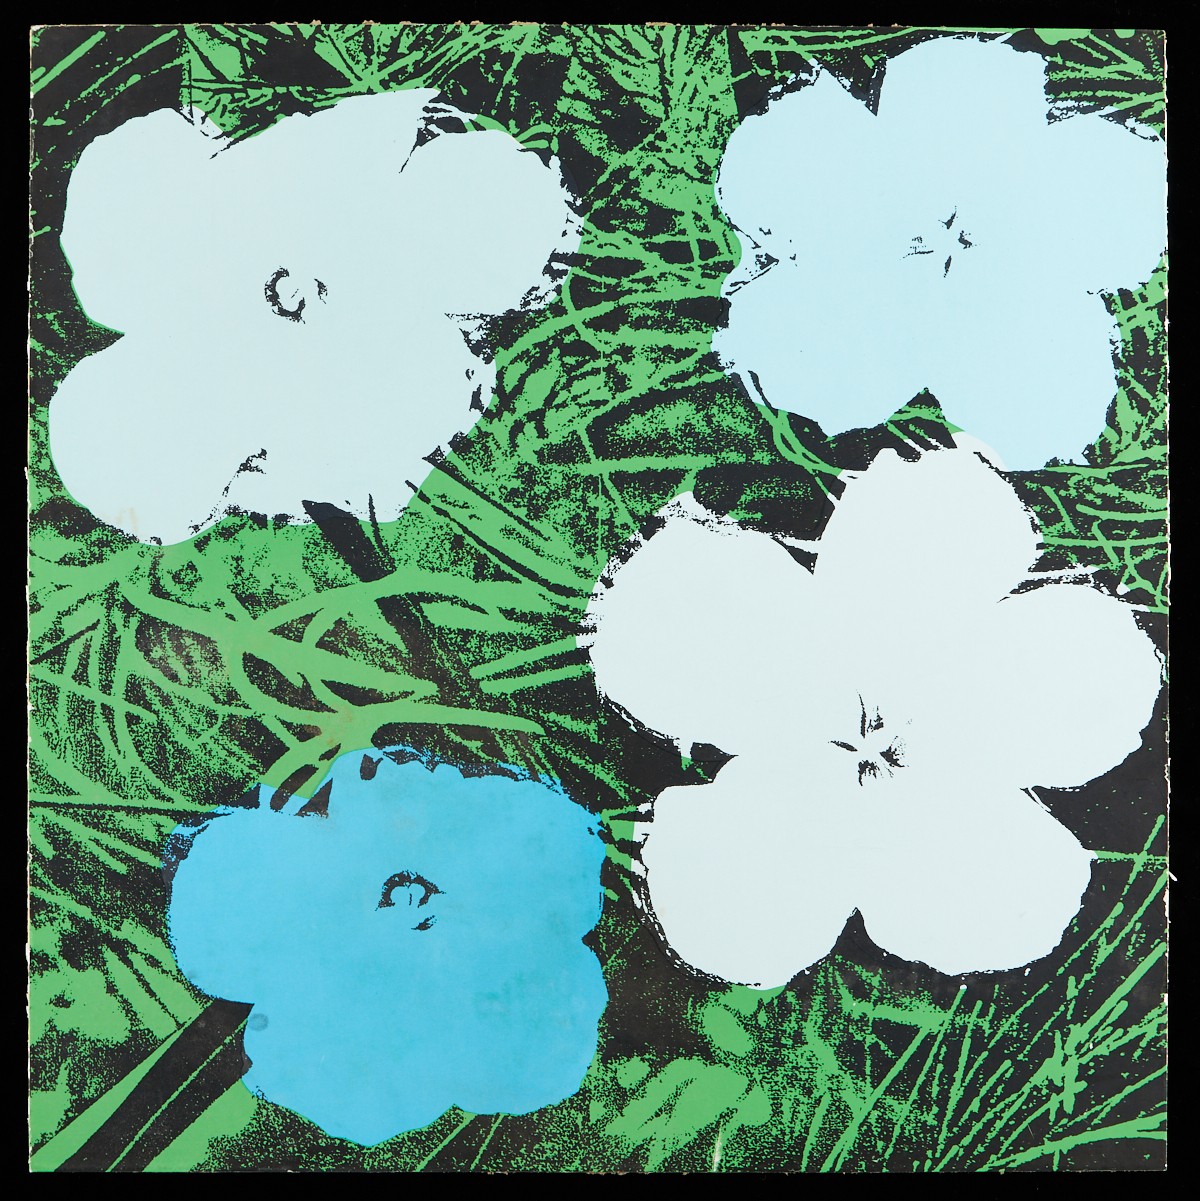 2 After Andy Warhol "Flower" Silkscreens - Image 2 of 14